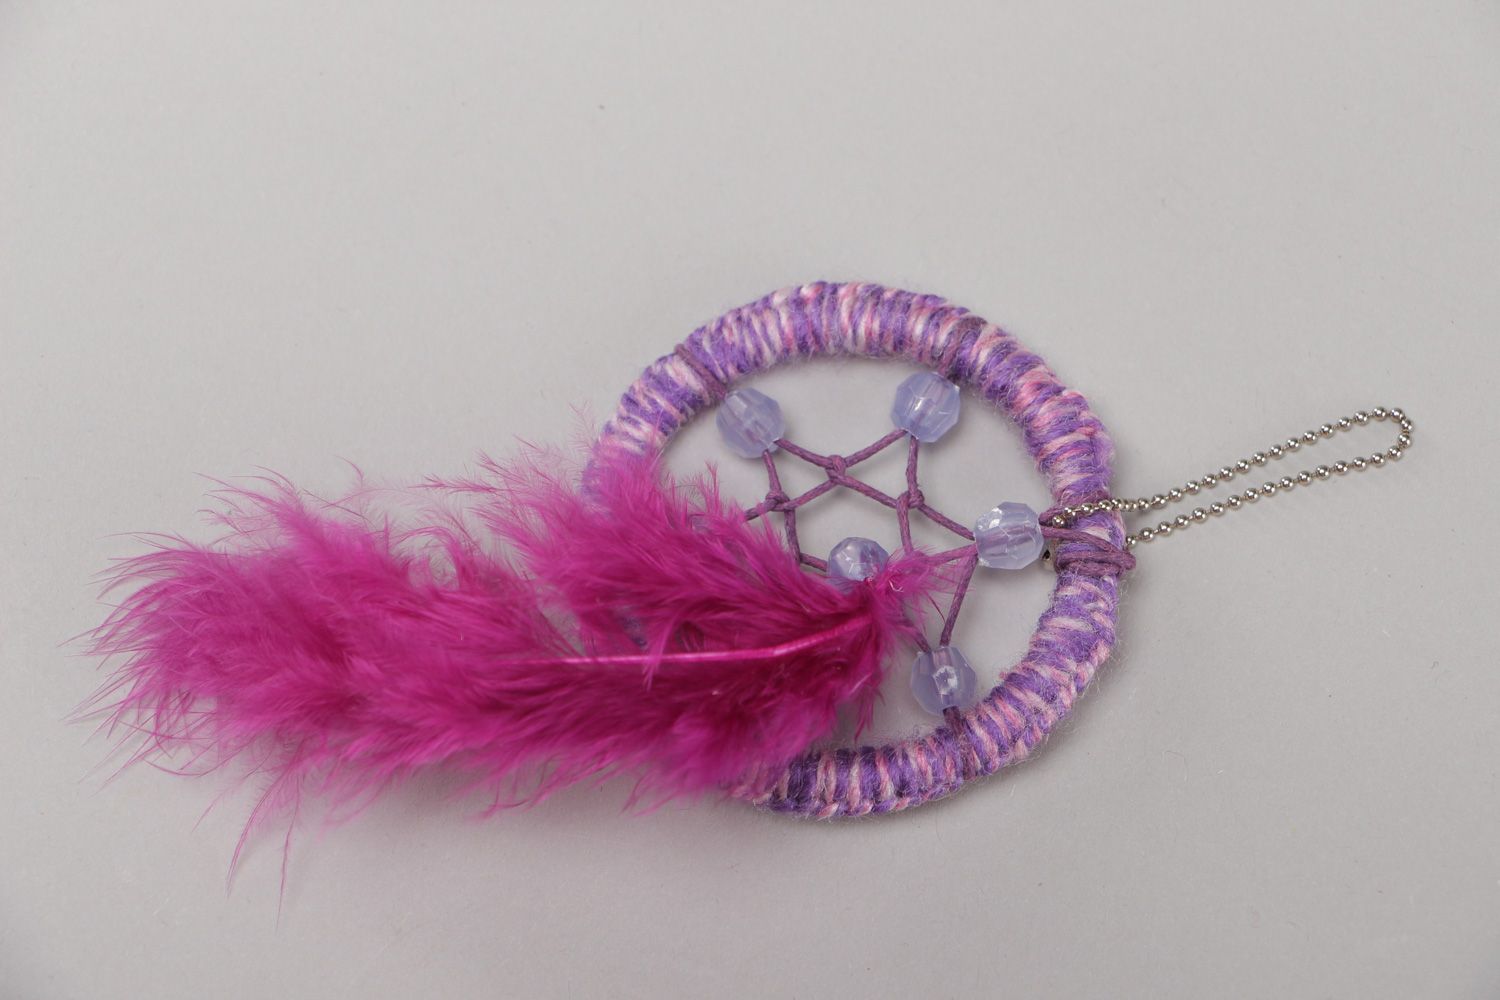 Handmade dreamcatcher keychain of violet color with feathers handbag charm photo 2